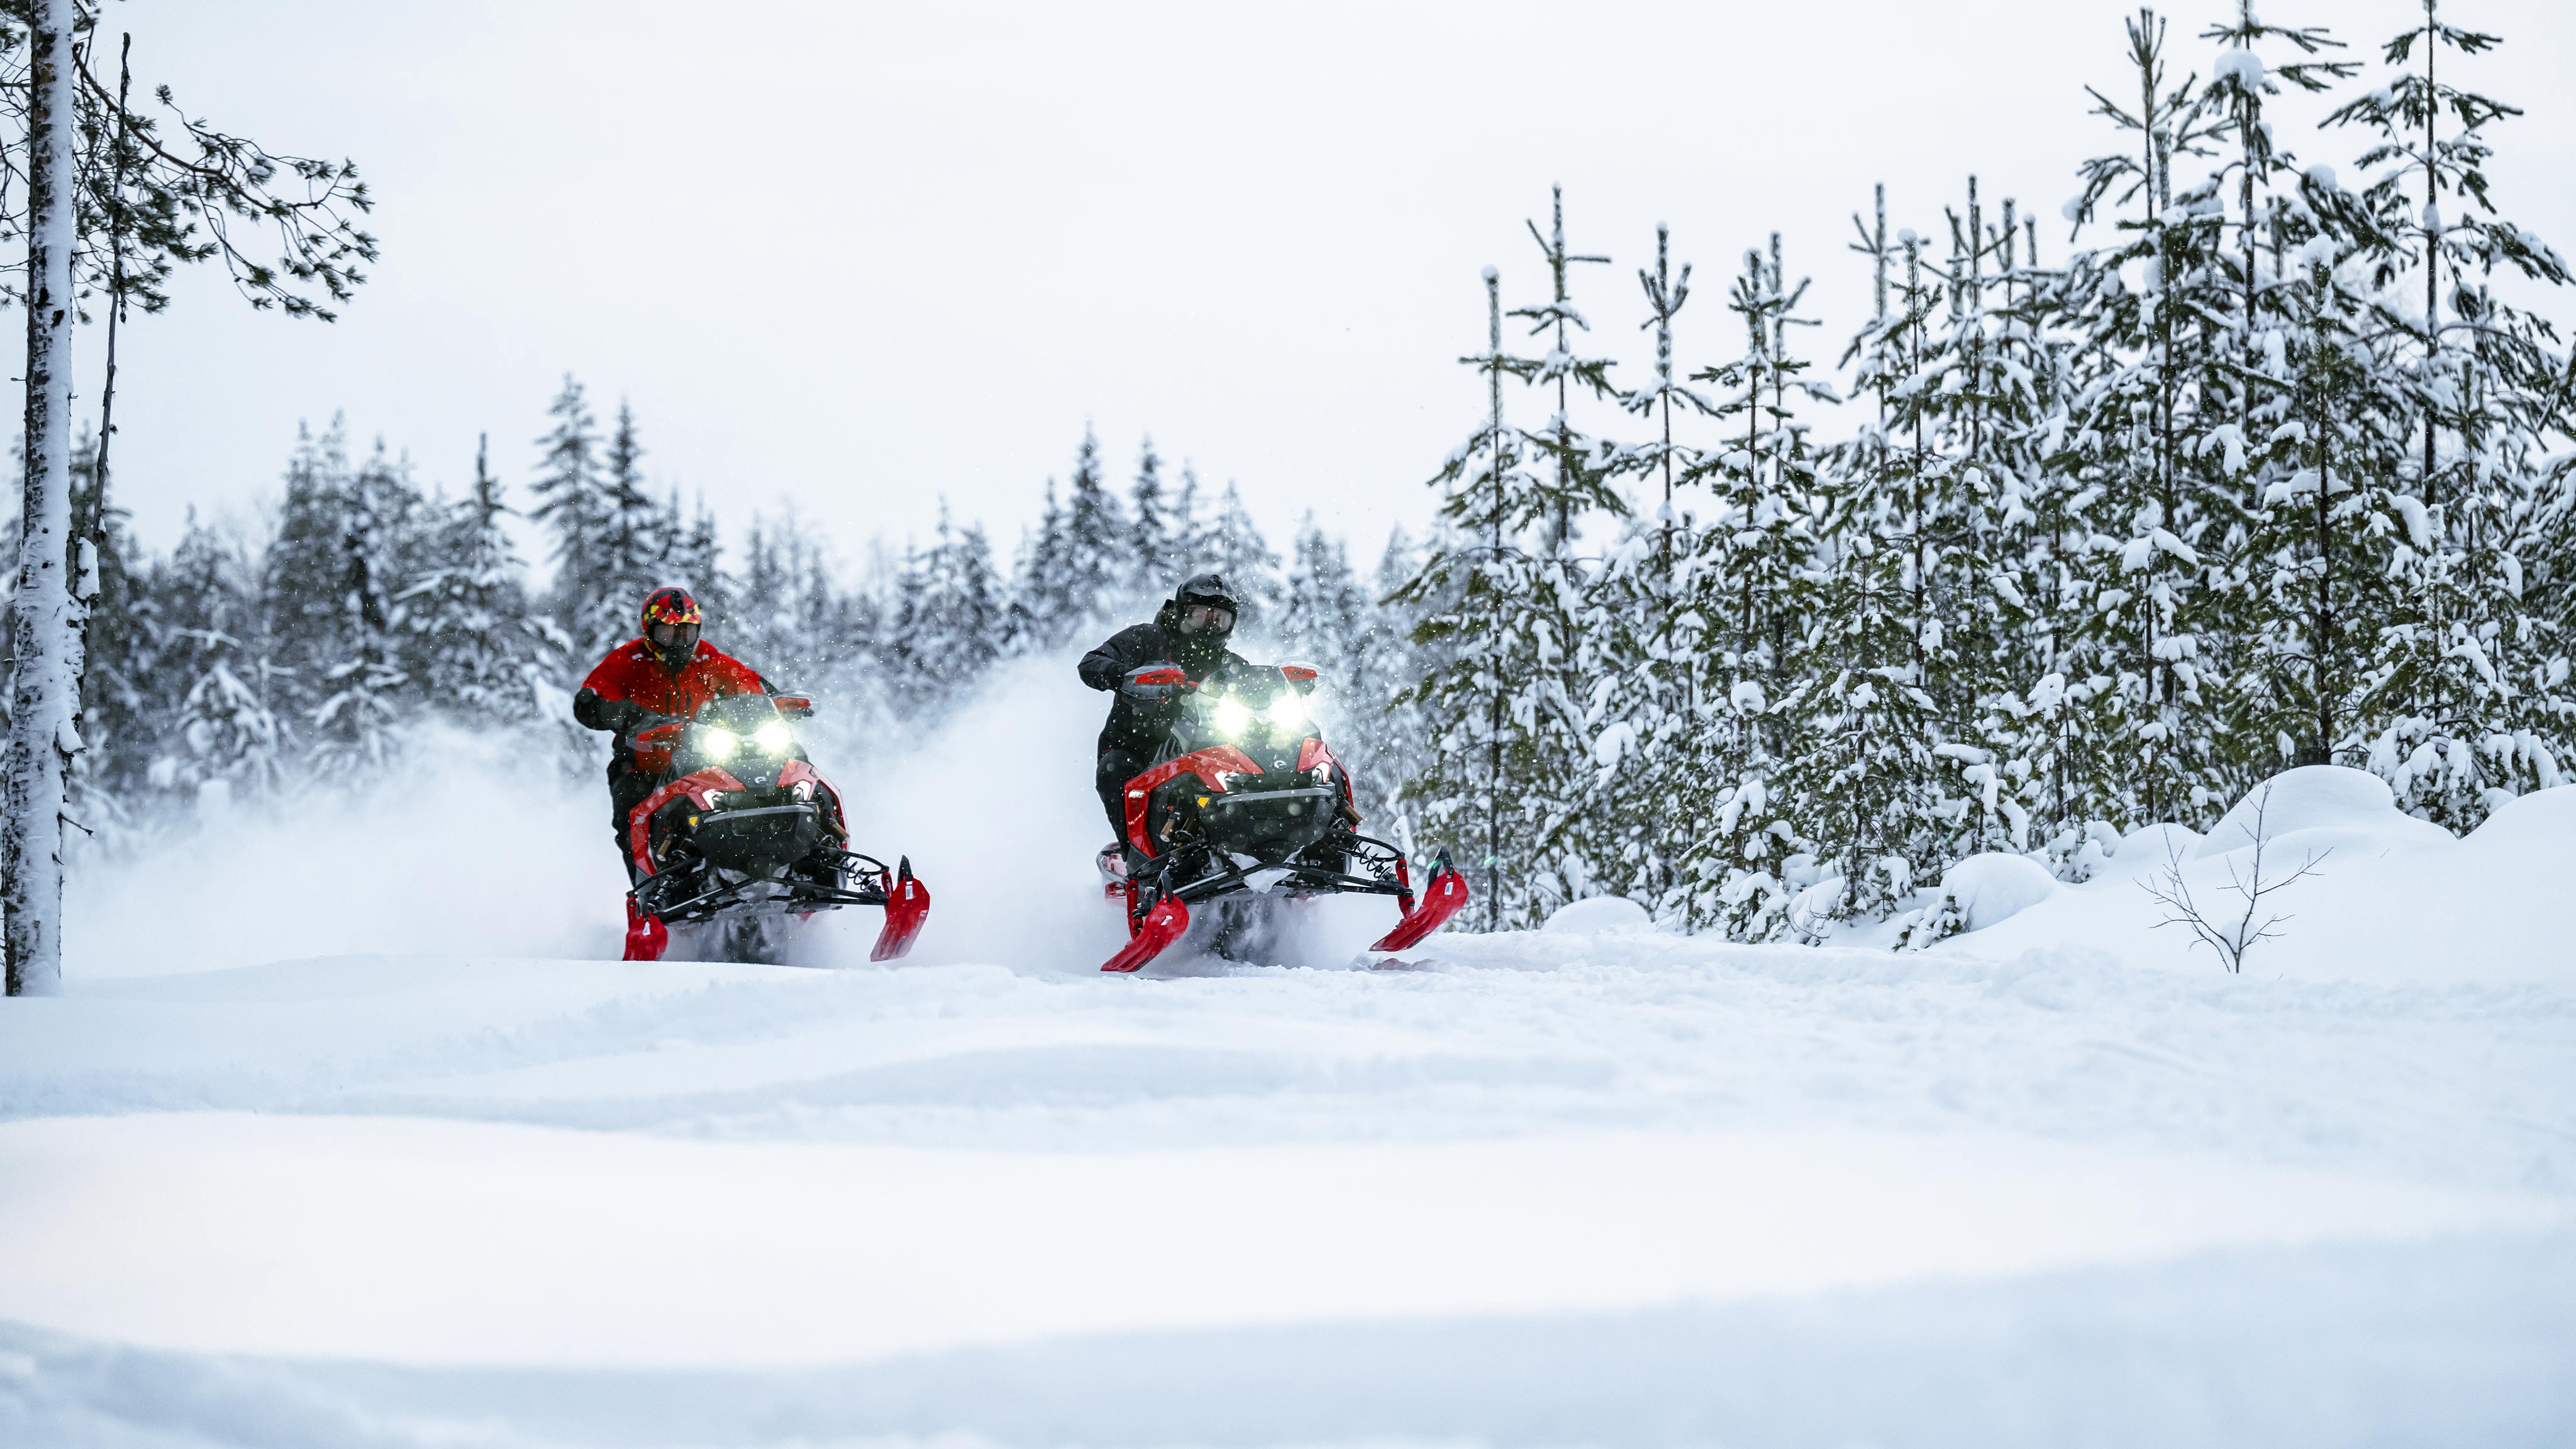 Two snowmobilers riding the new Lynx sleds